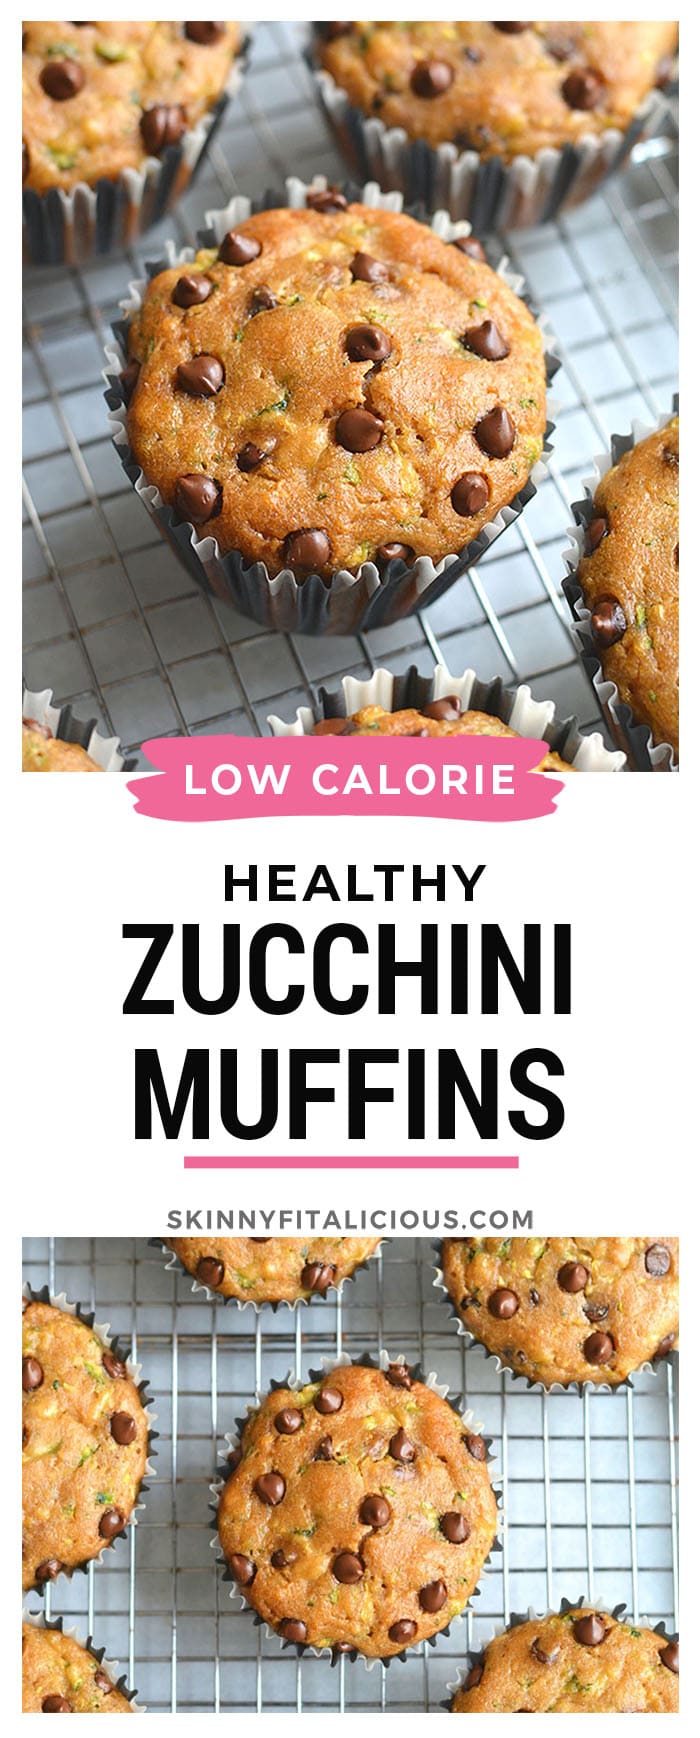 These Healthier Chocolate Chip Zucchini Muffins are dairy free, made with real food ingredients and are lighter and healthier. A gluten free snack you can't resist! Perfect for post workout, breakfast or a snack!